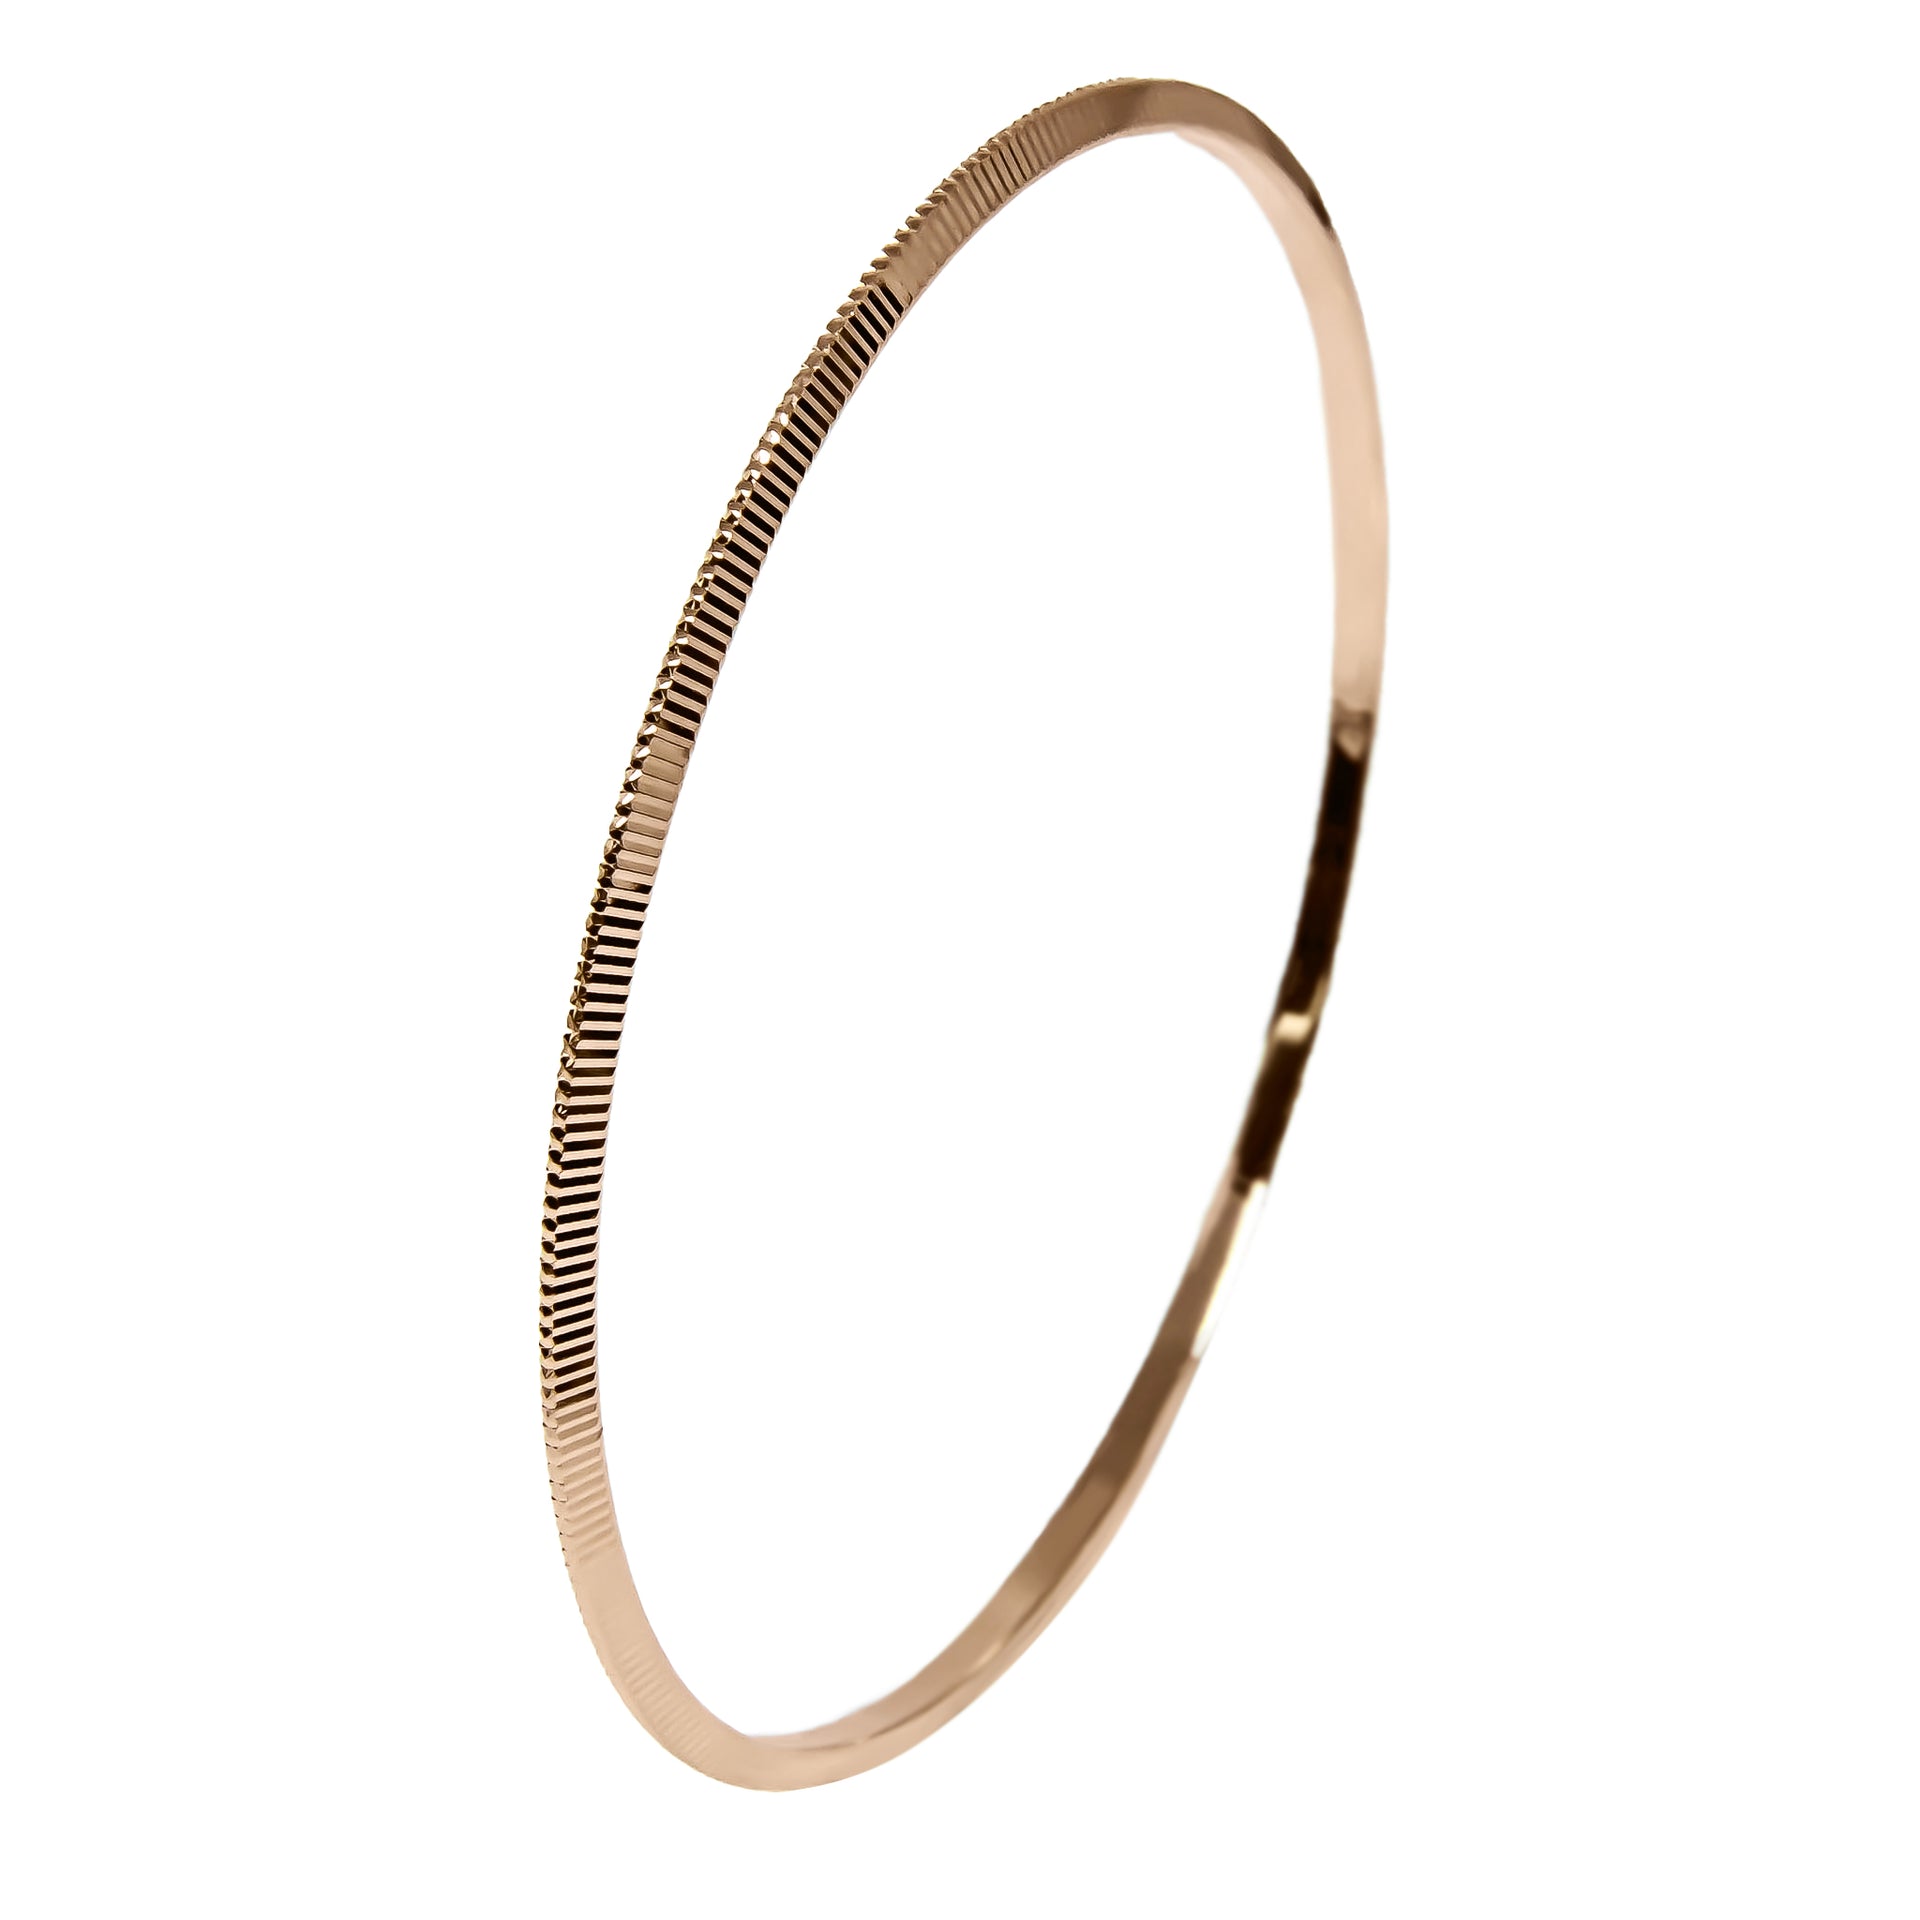 Bracelet EARTH IS ROUND 2mm profil triangle or rouge 18k 750